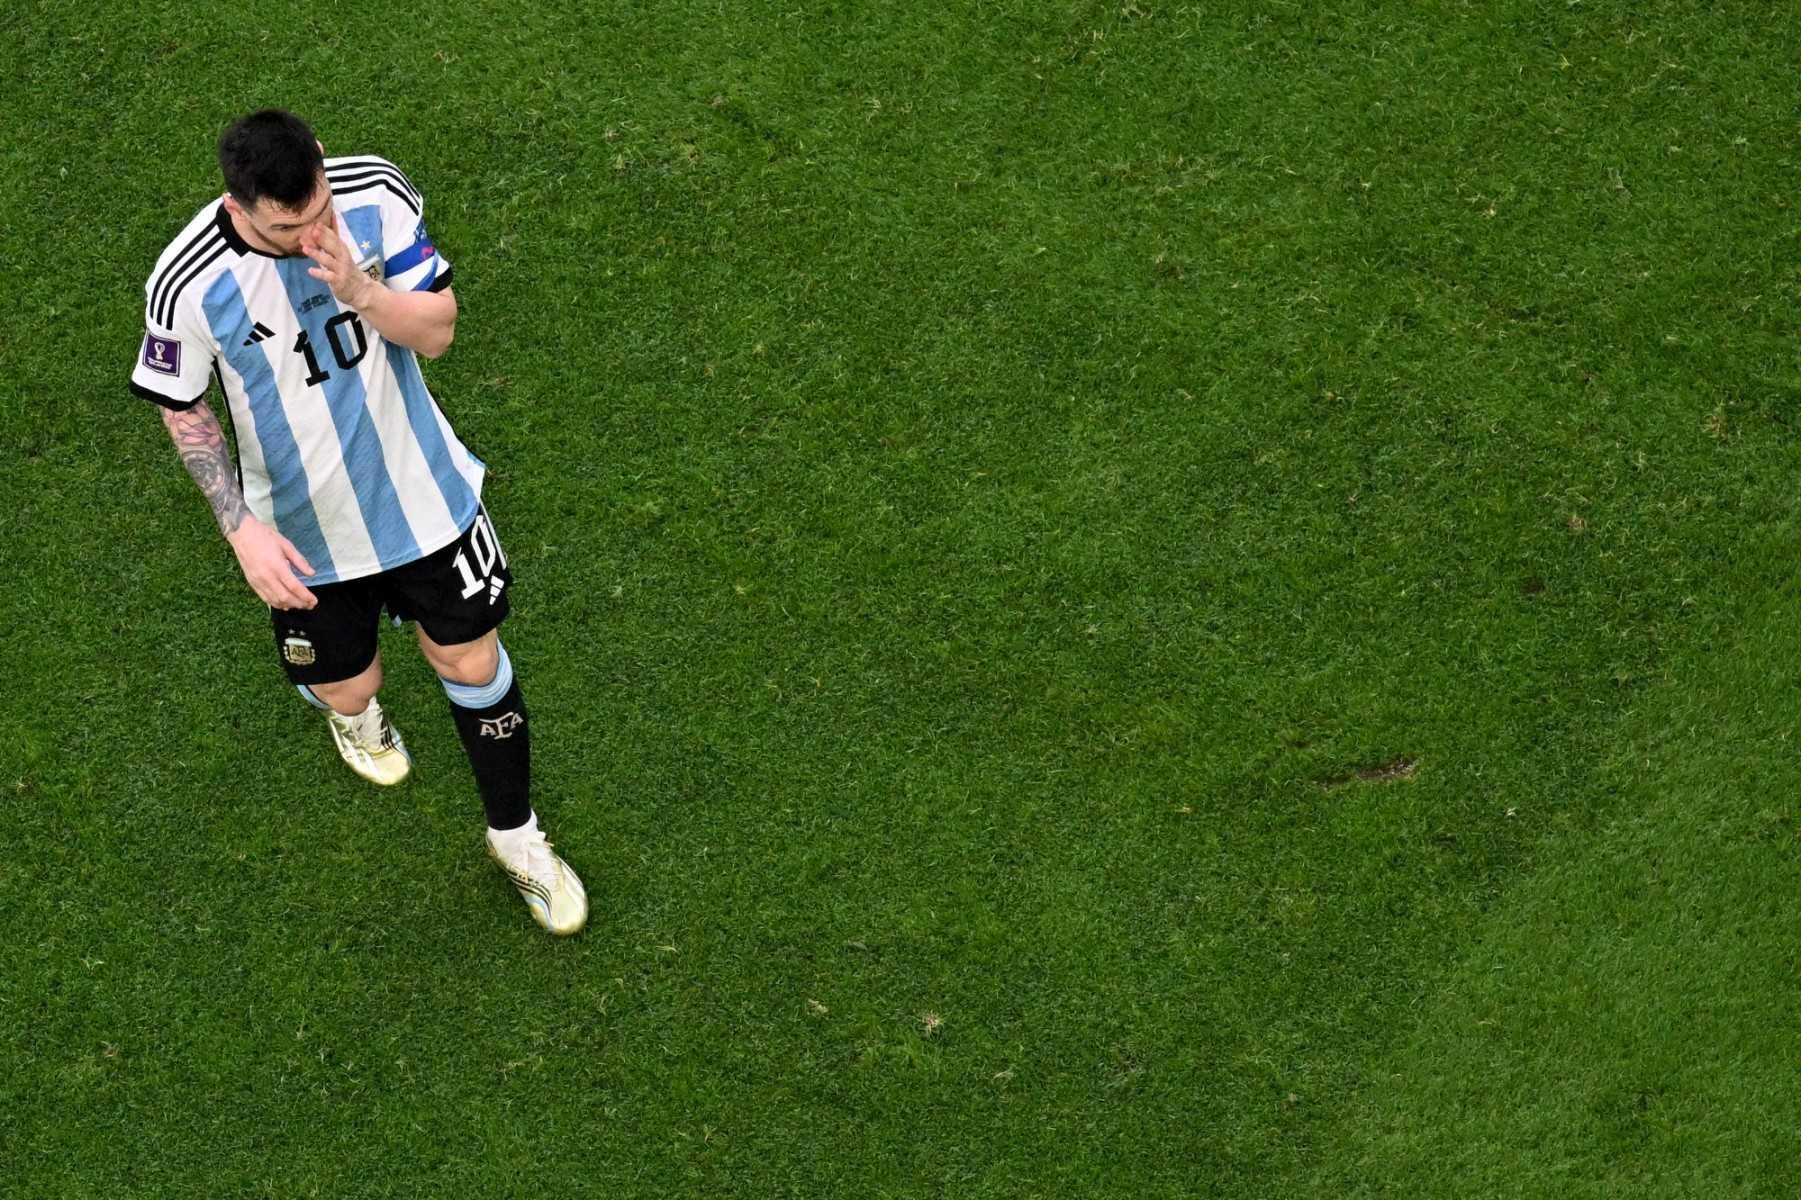 Argentina's forward Lionel Messi reacts after their defeat in the Qatar 2022 World Cup Group C football match between Argentina and Saudi Arabia at the Lusail Stadium in Lusail, north of Doha on Nov 22. Photo: AFP